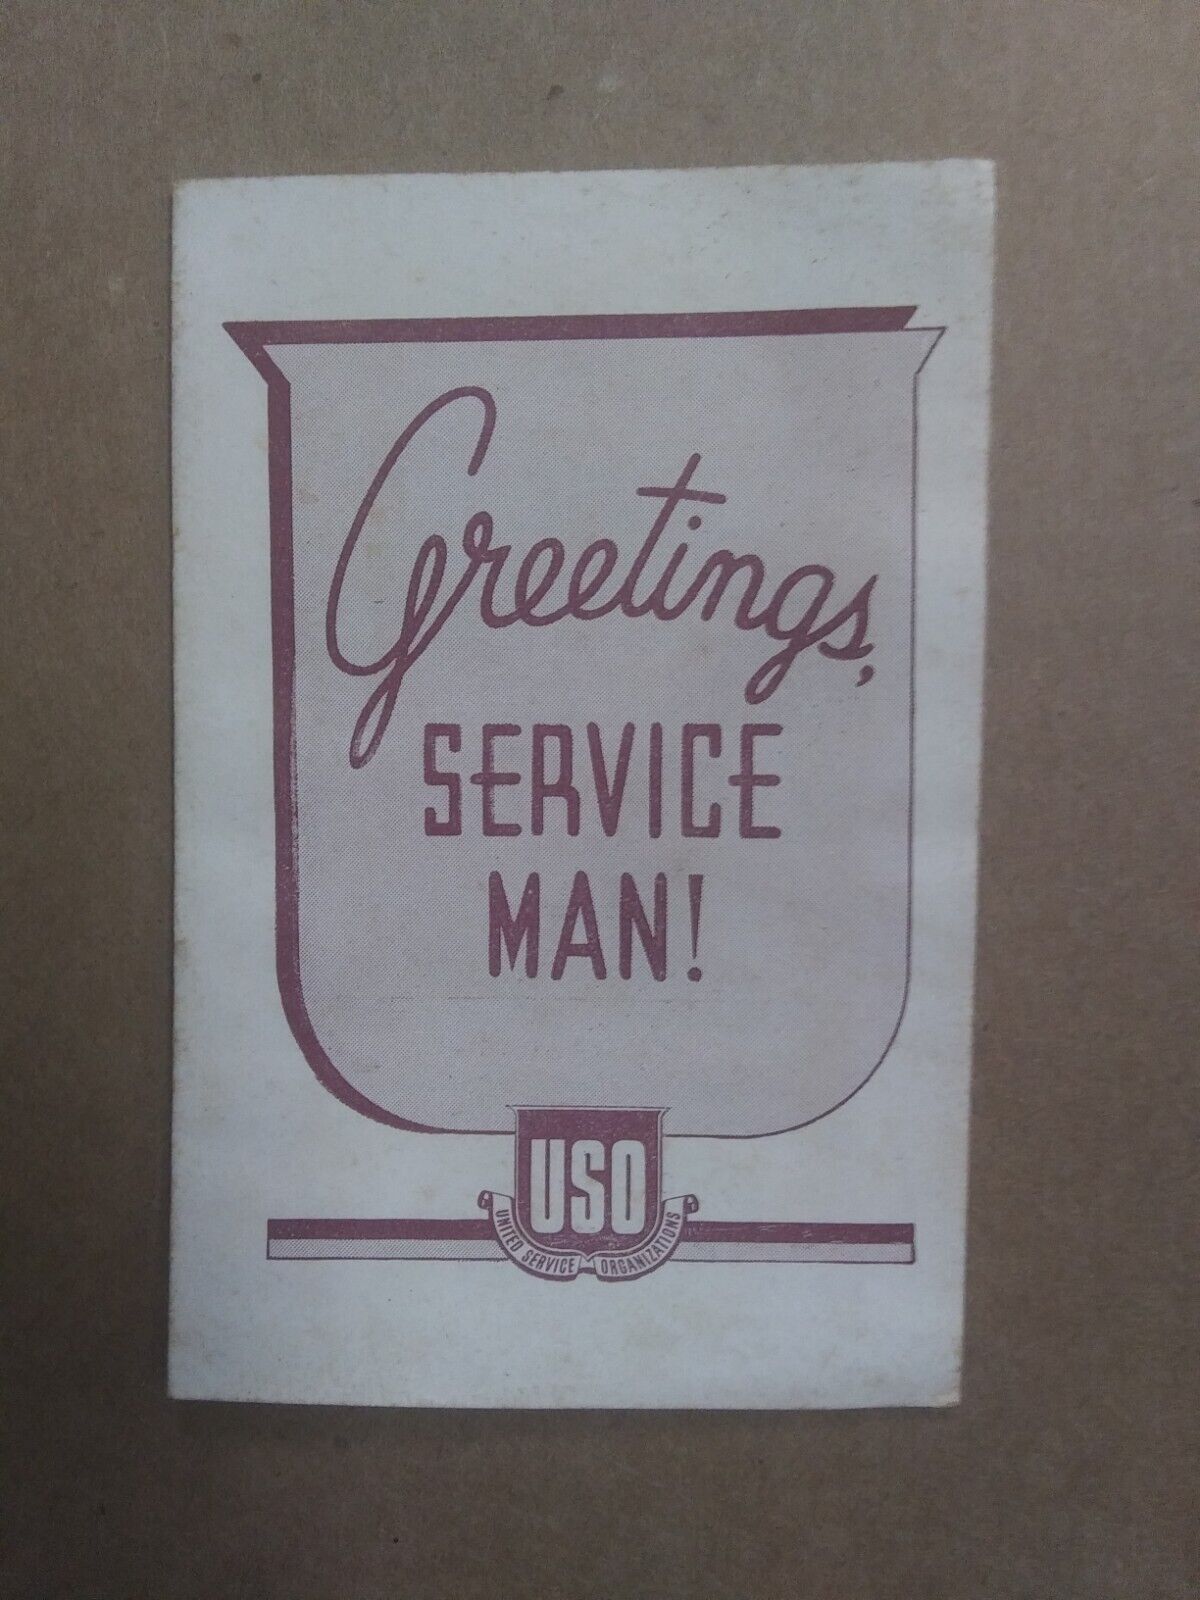 Greetings Service Man USO Booklet 1943 16 Pages